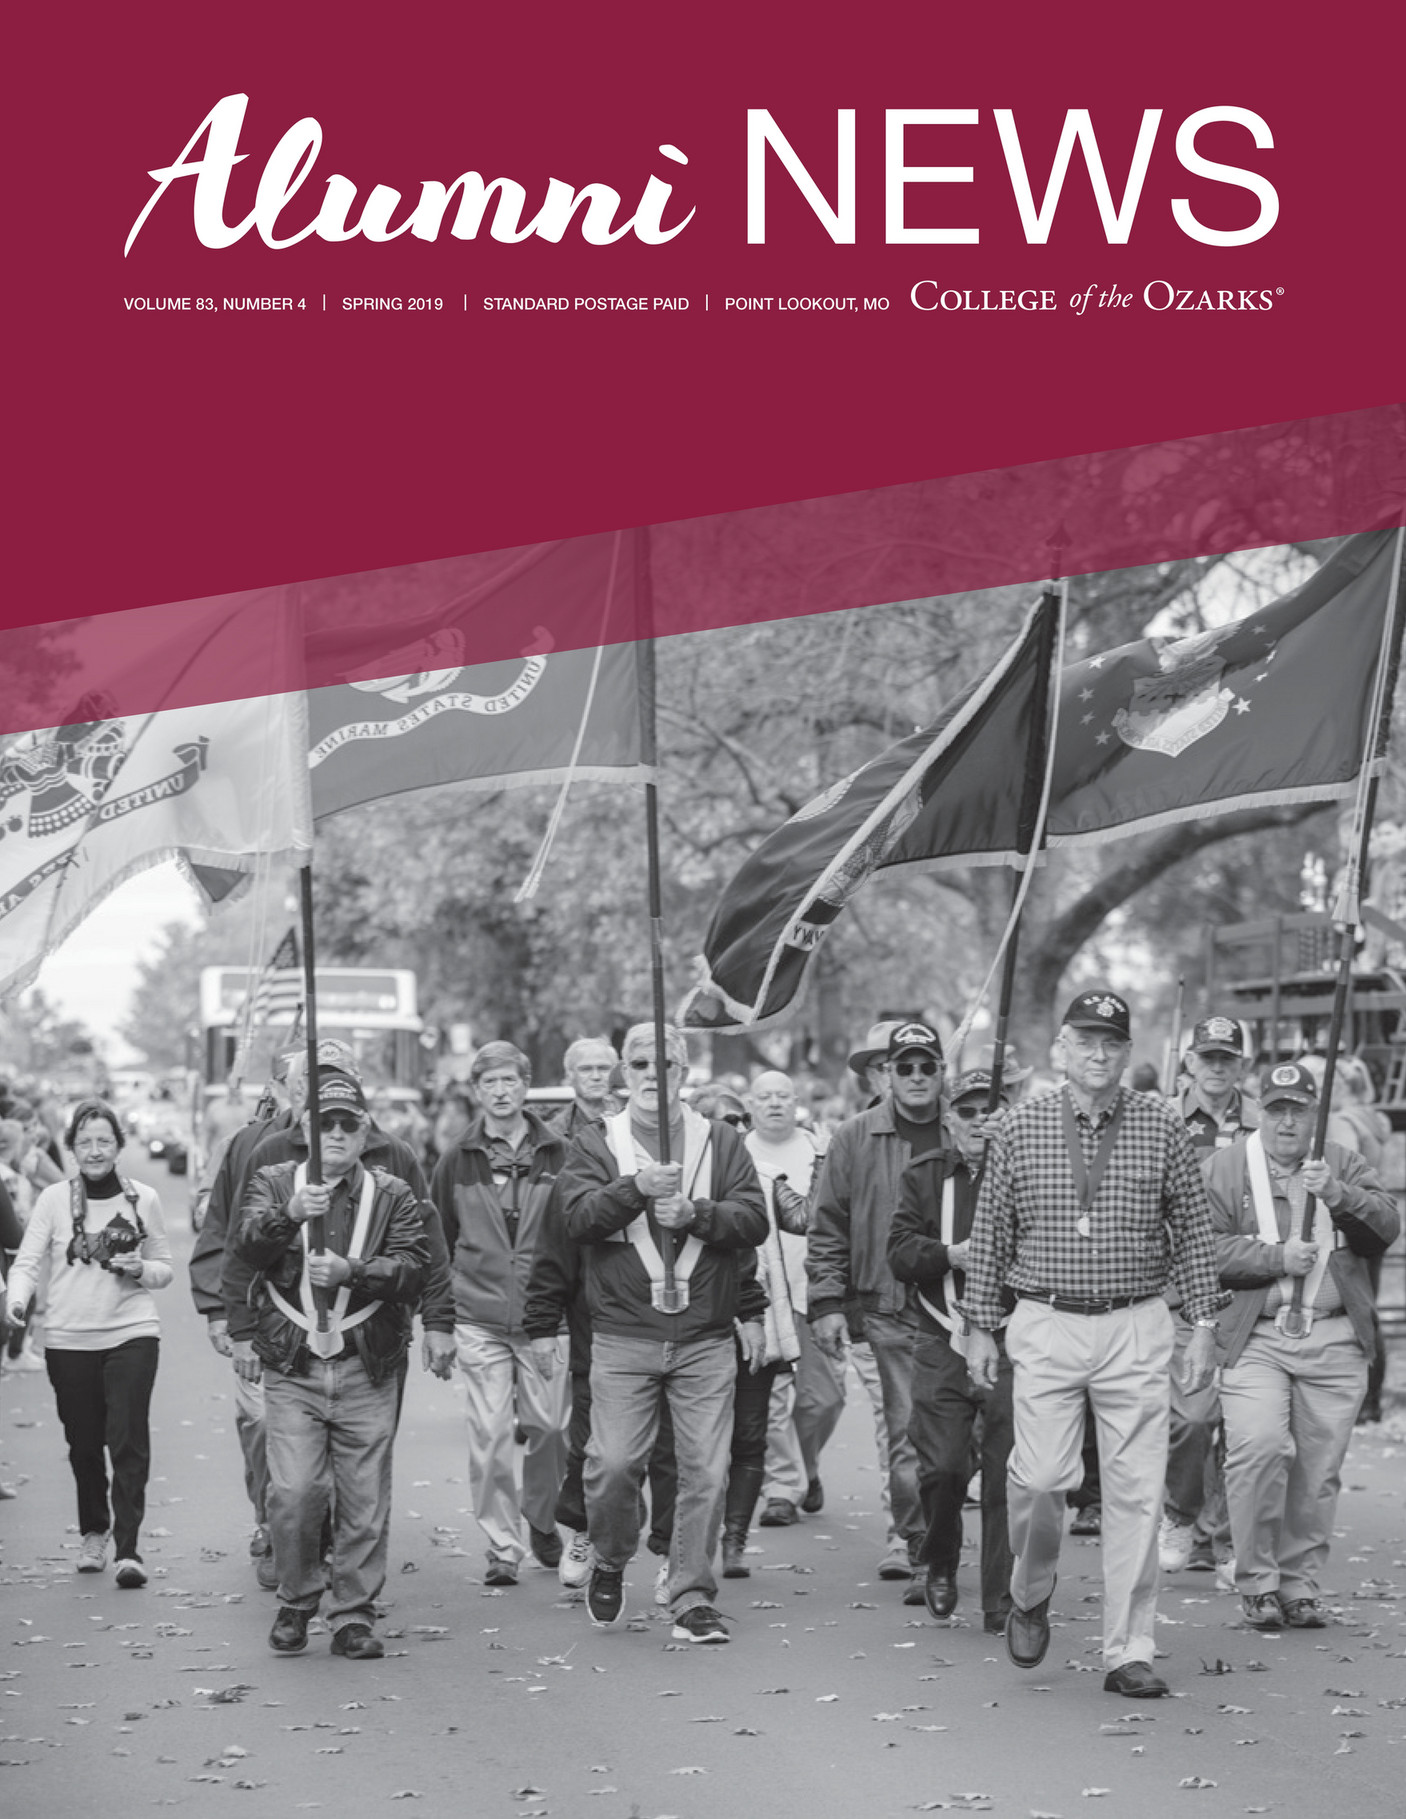 College of the Ozarks - Spring 2019 Alumni News - Page 1